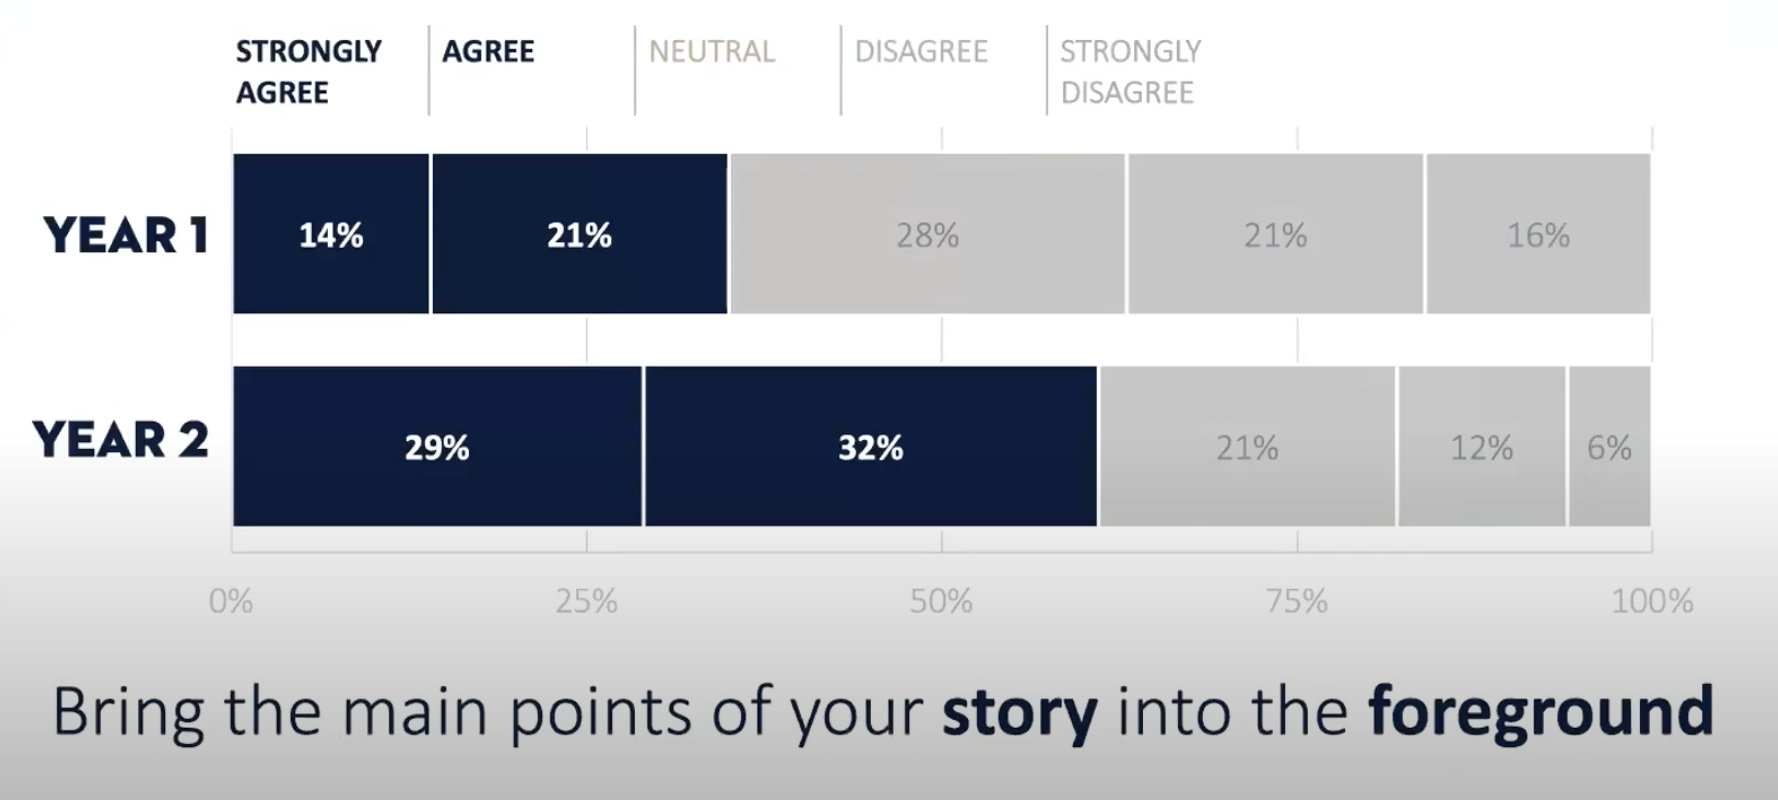 The four main data points for "Strongly Agree" and "Agree" are highlighted in navy against a gray background